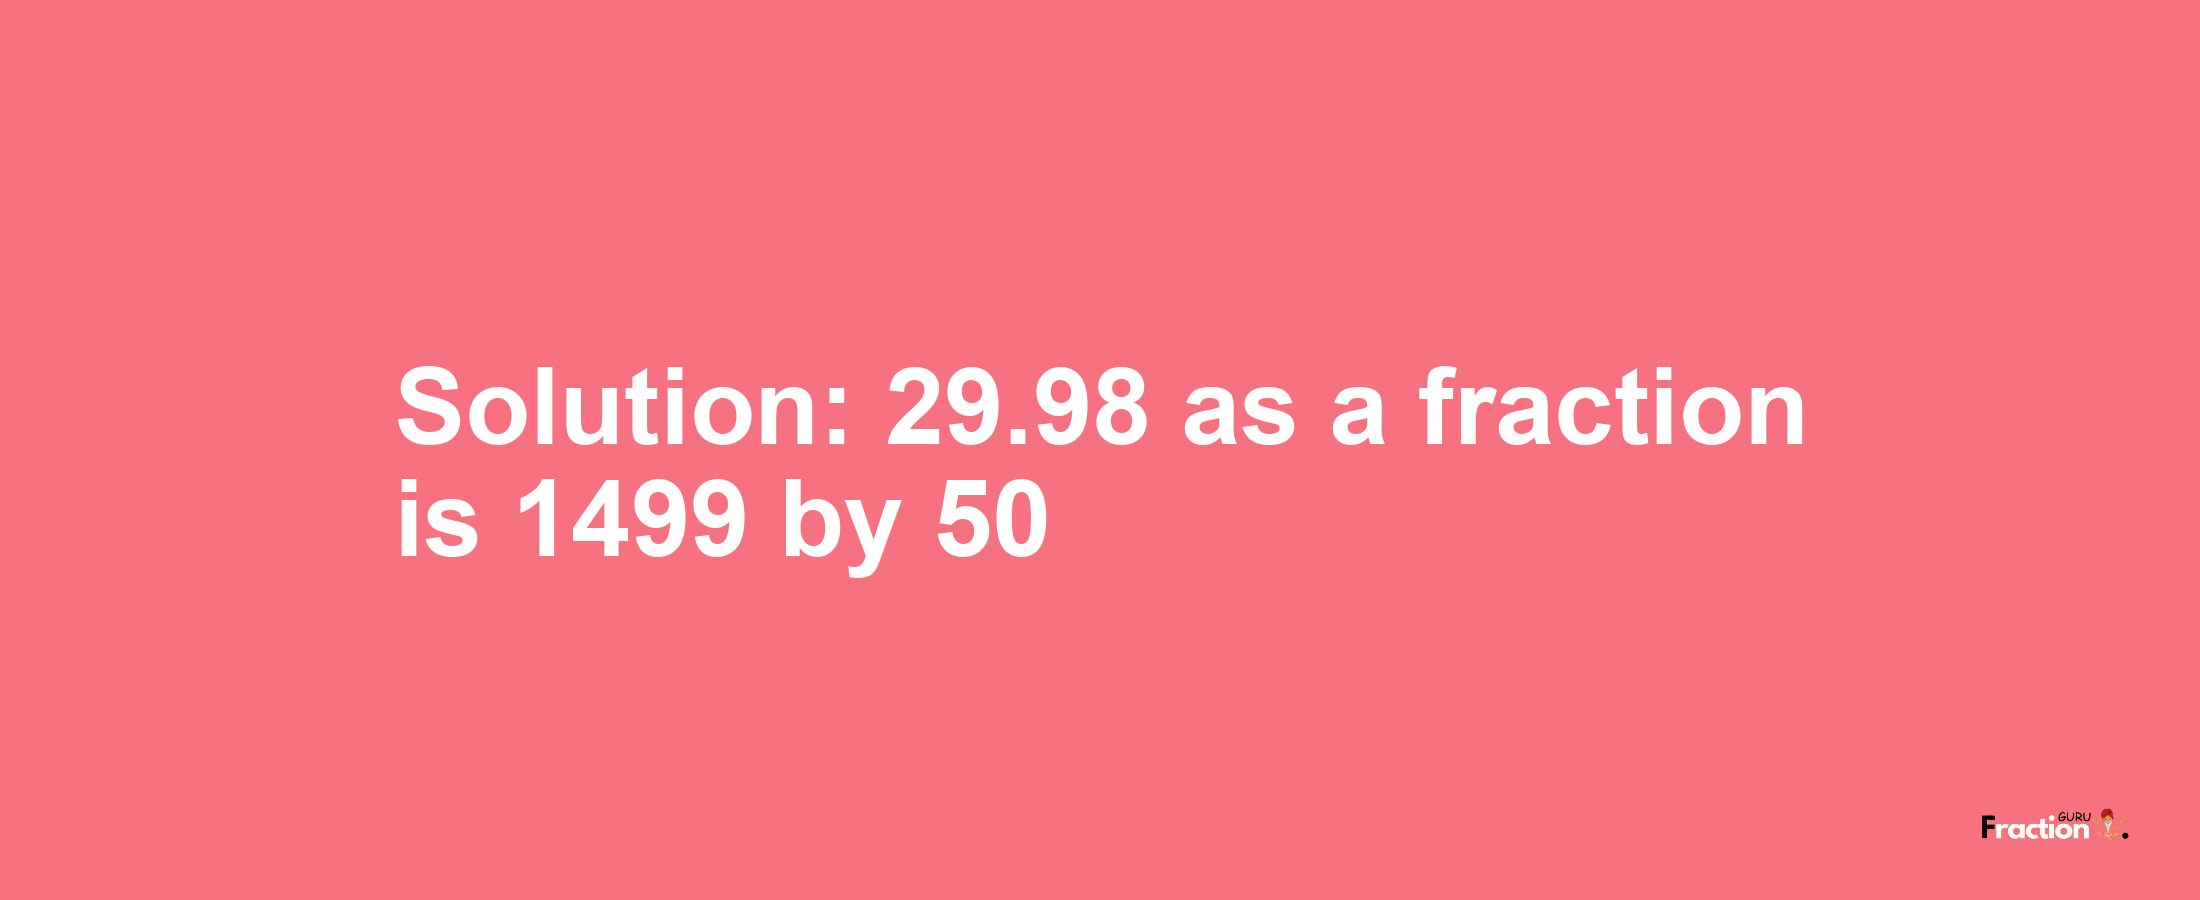 Solution:29.98 as a fraction is 1499/50